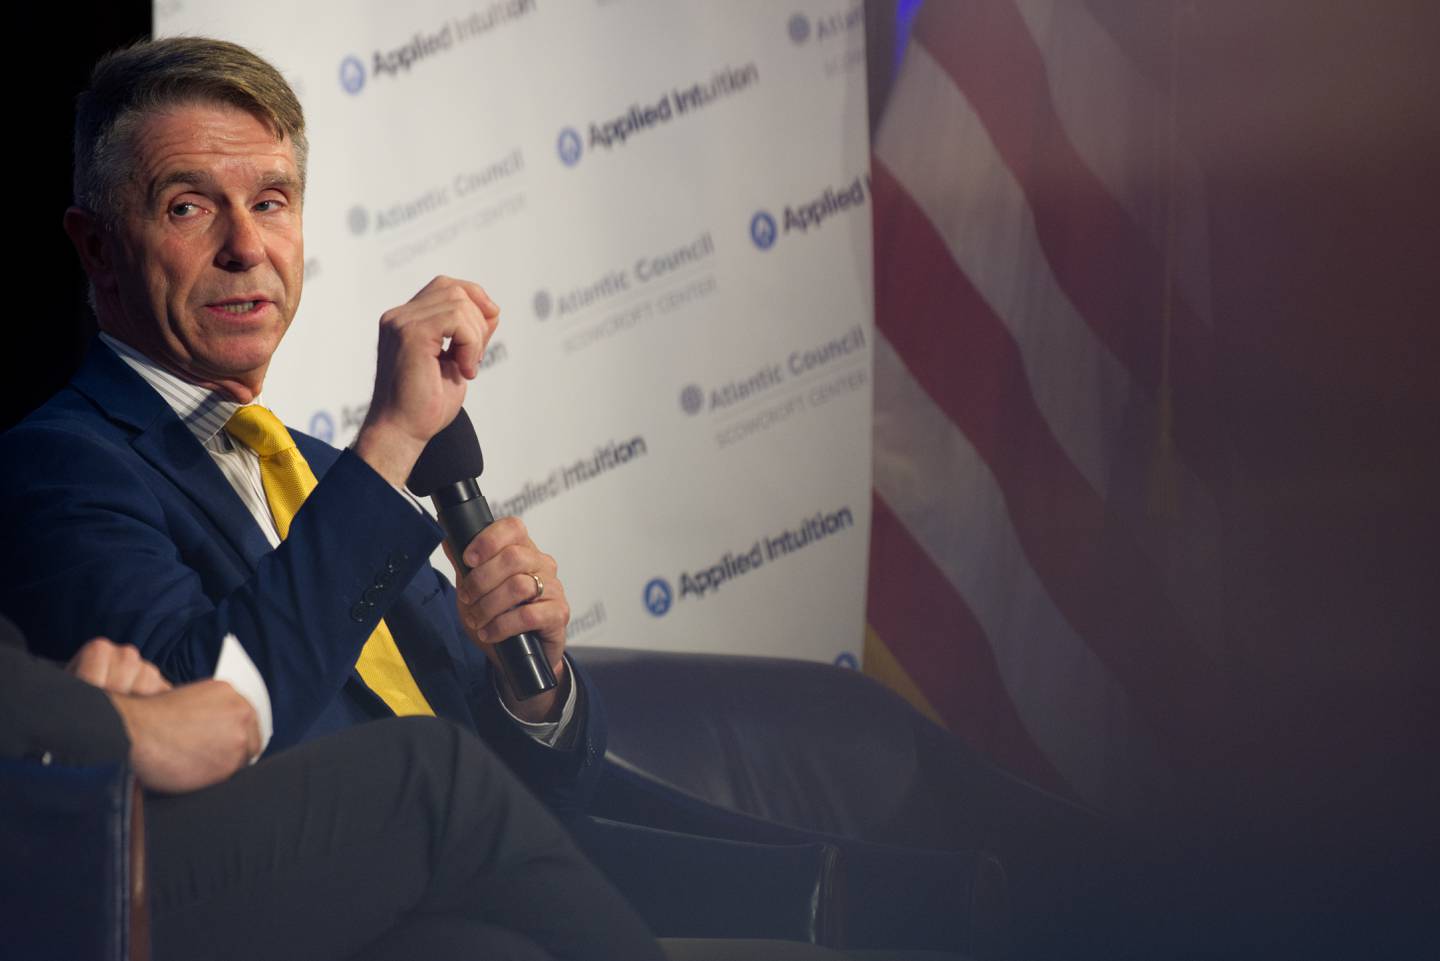 U.S. Rep. Rob Wittman, a Virginia Republican, speaks May 17, 2023, at the Nexus 23 defense conference at the National Press Club in Washington, D.C.